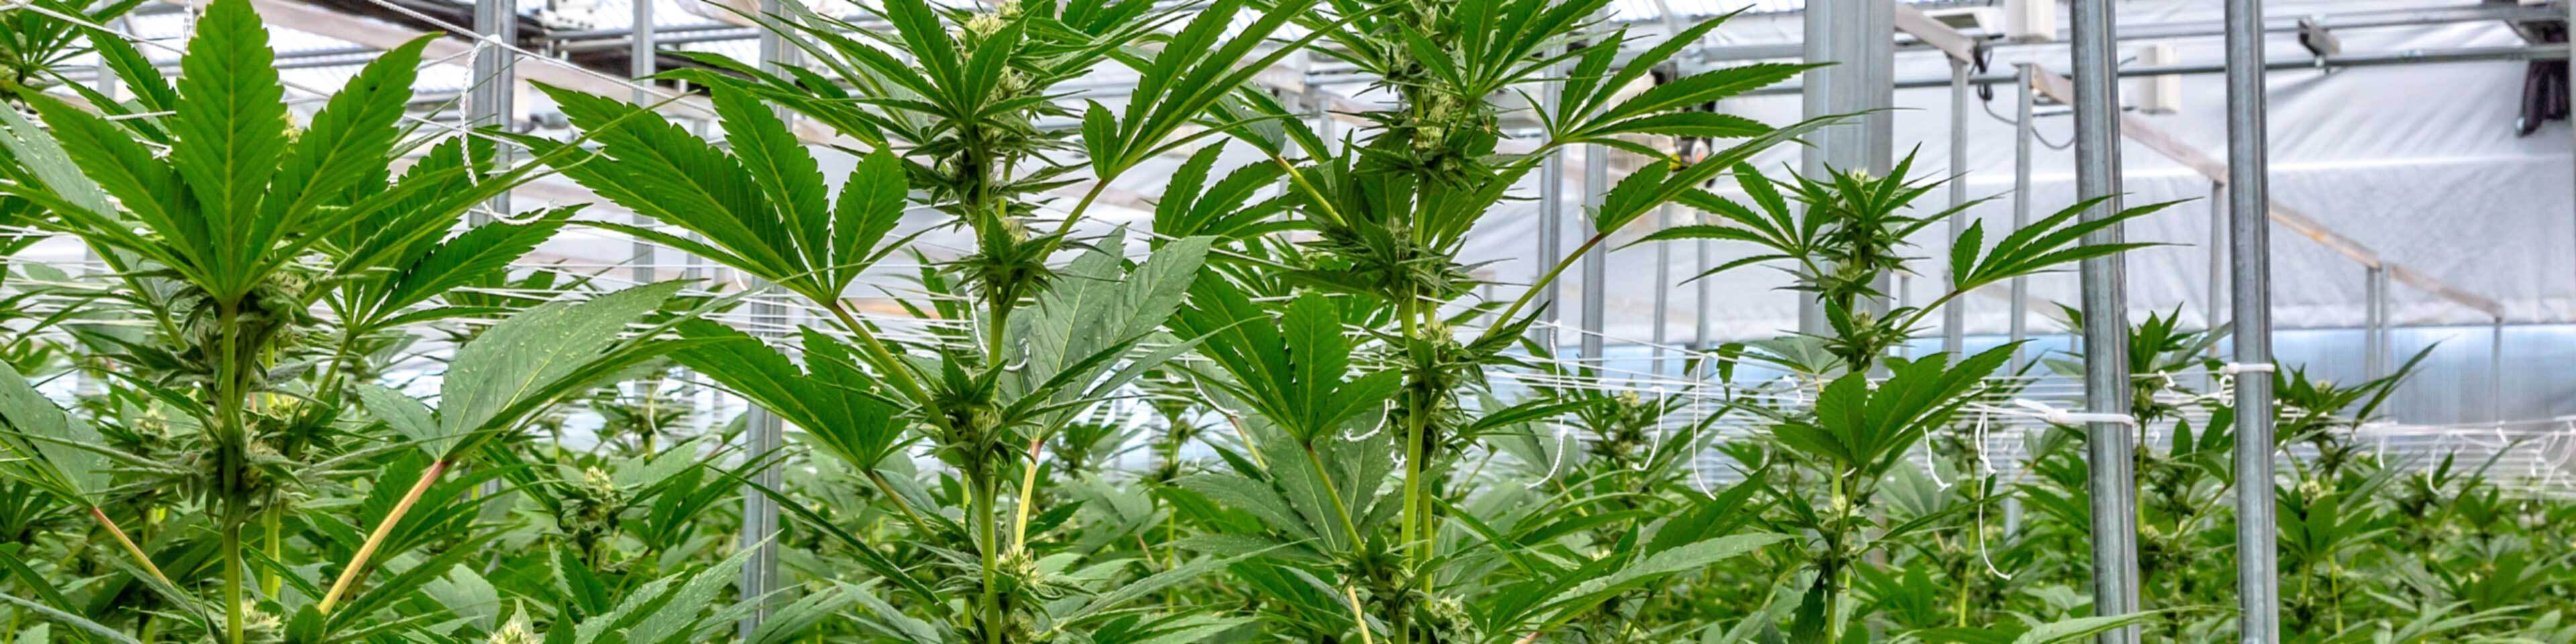 CT residents can grow marijuana at home. Here's what to know